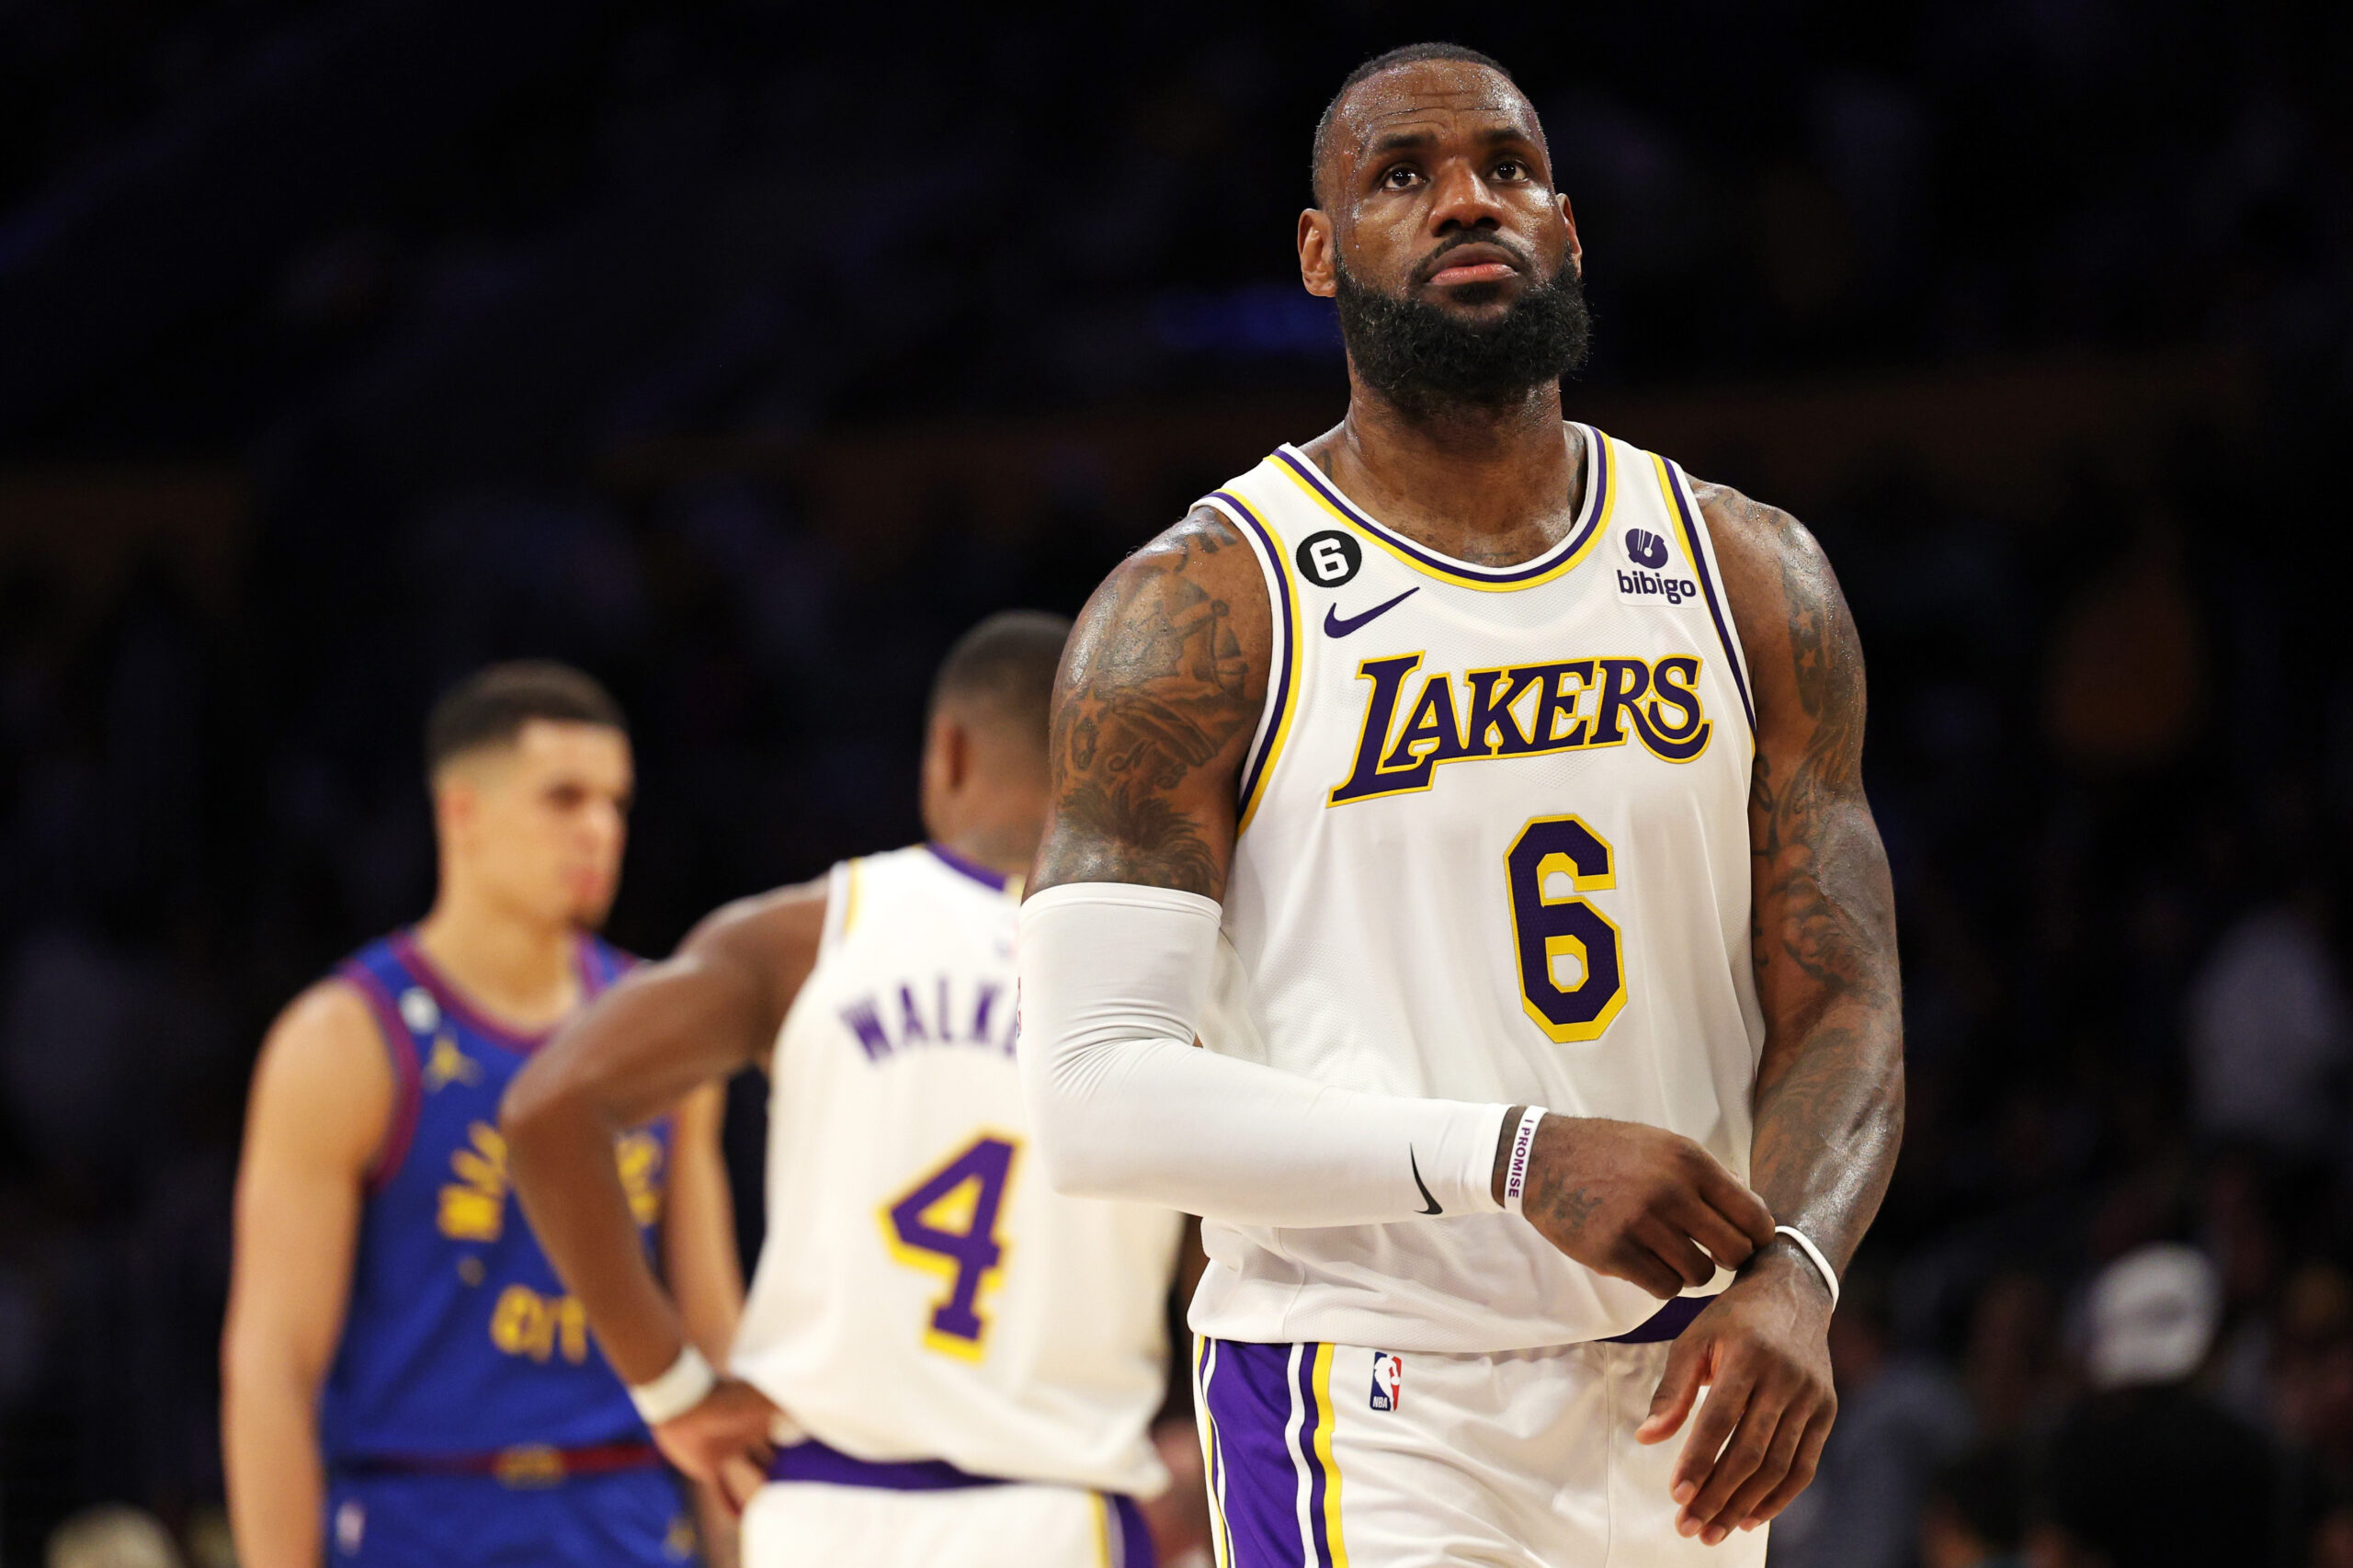 “There’s no if, ands or buts”: LeBron James issues warning to Lakers’ role players after disappointing Game 1 loss